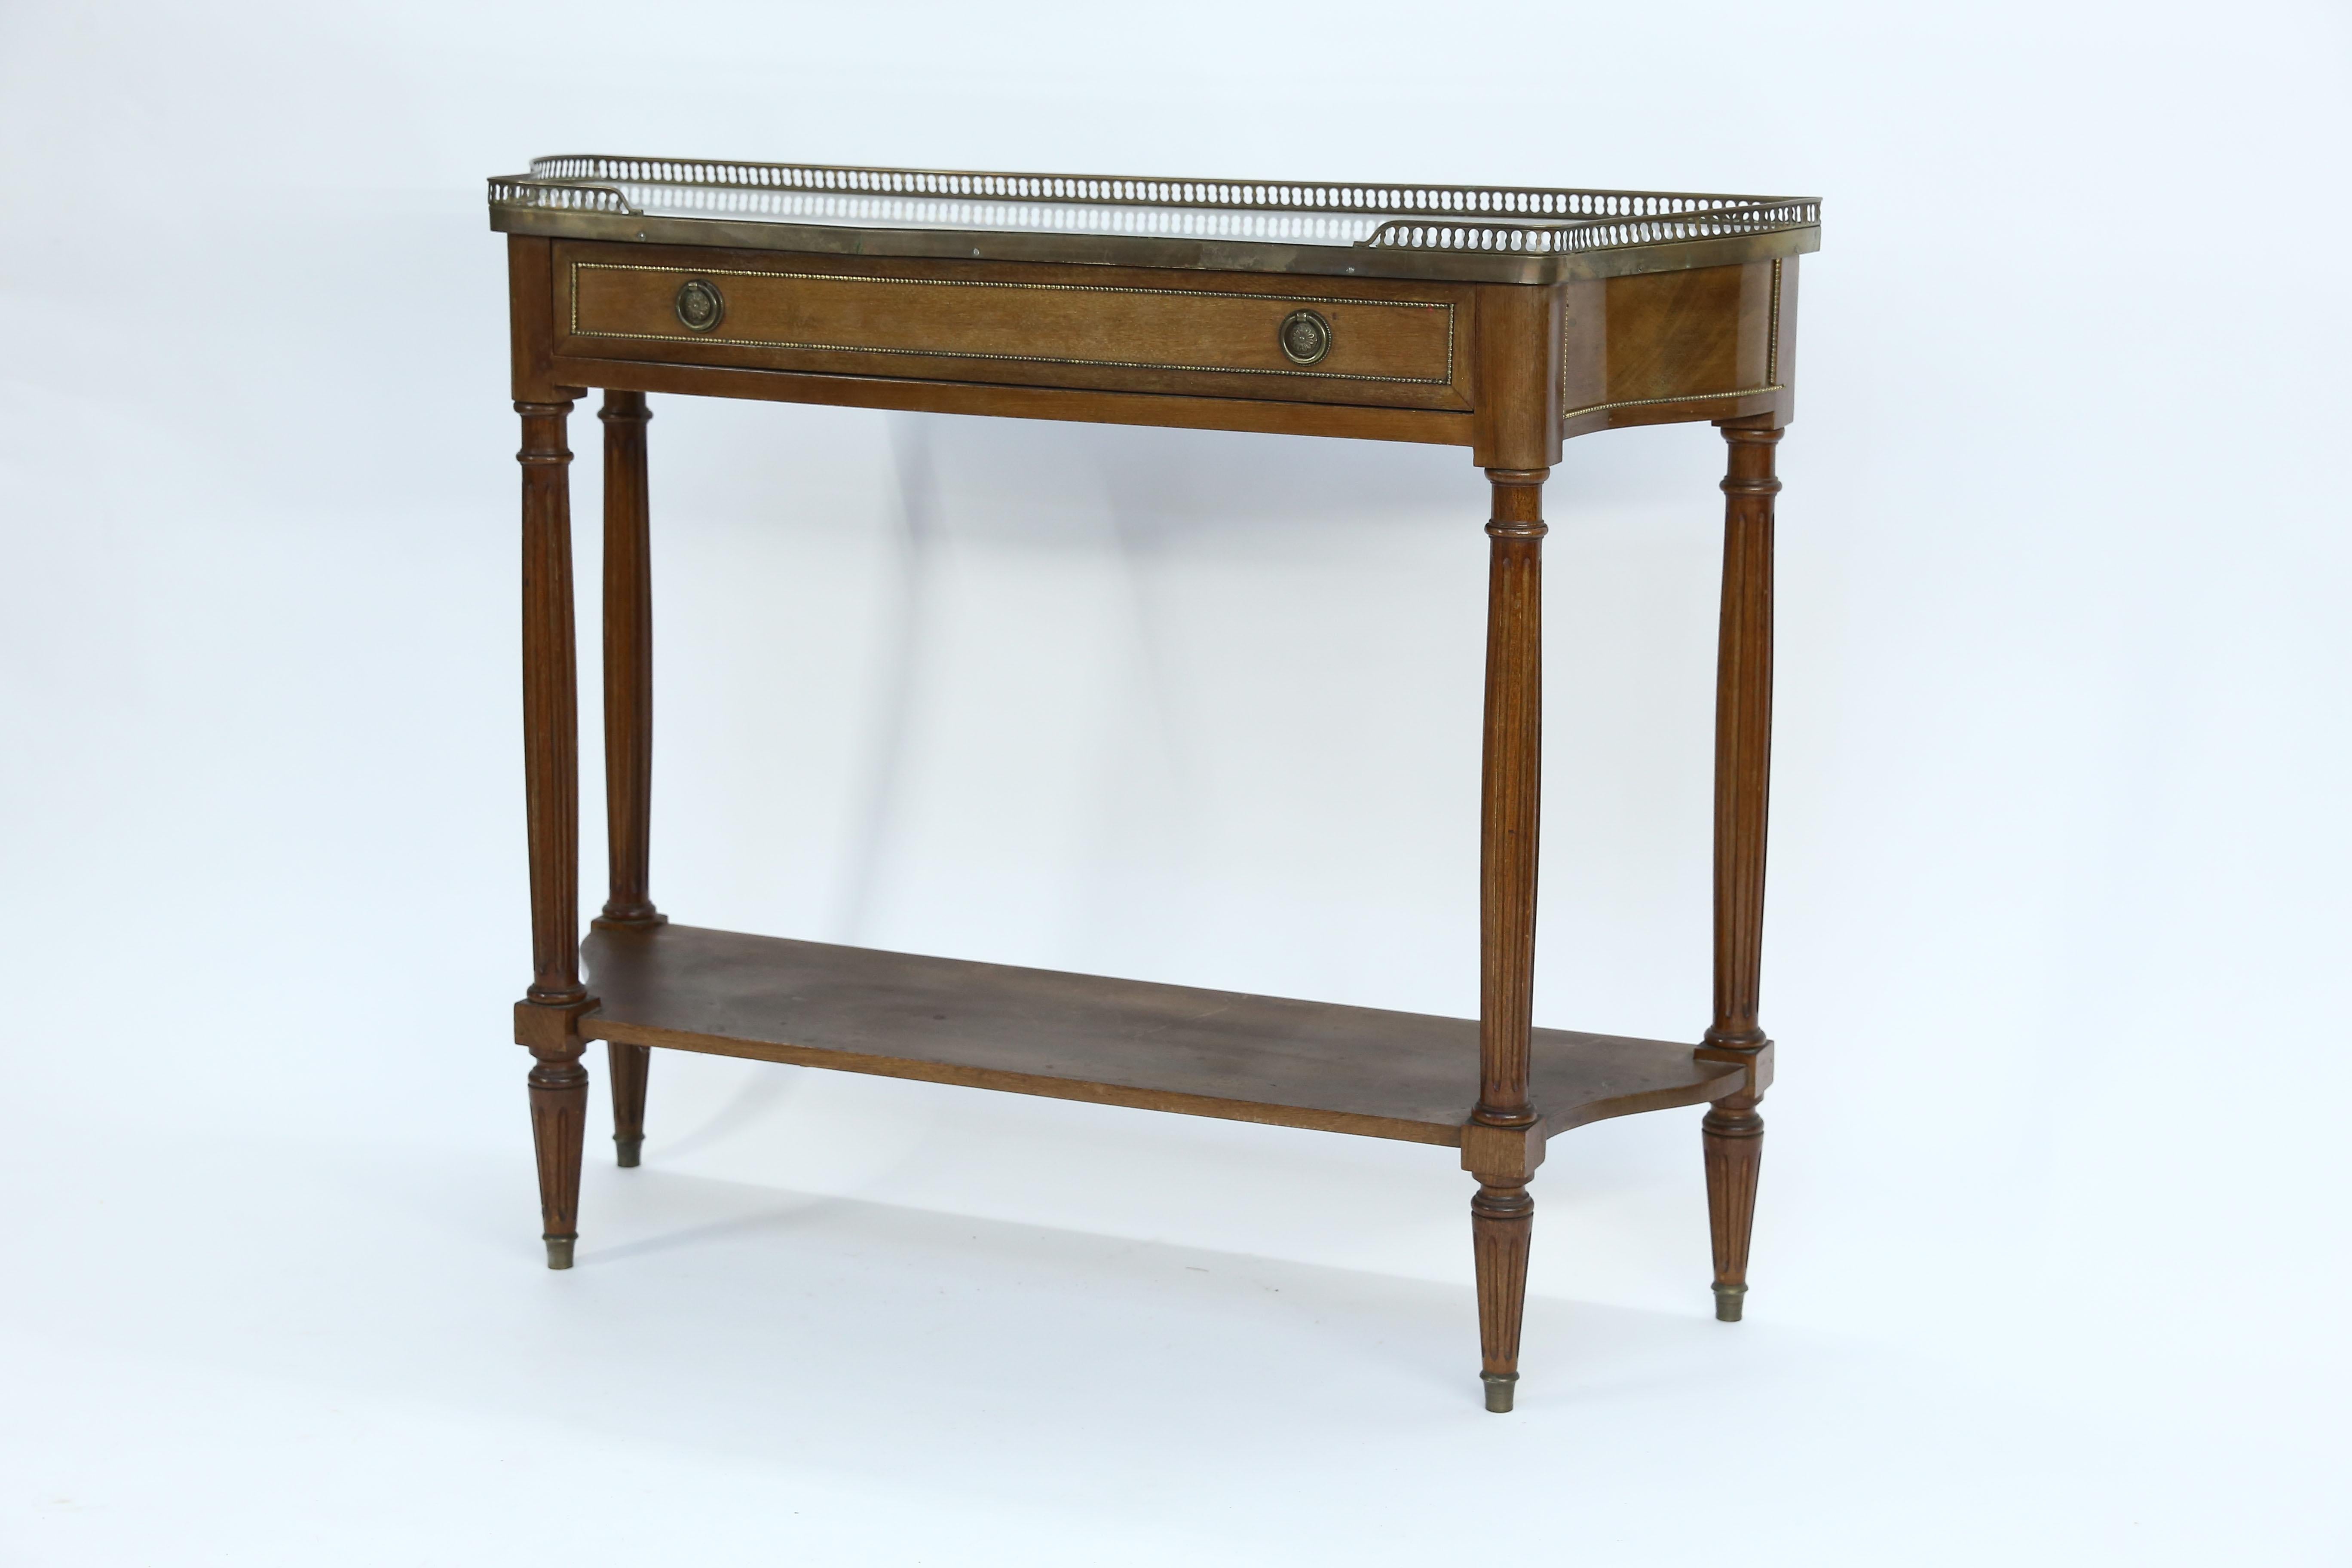 Beautiful 19th century French console with a raised brass gallery and Carrara marble top. This console has one drawer and one shelf.